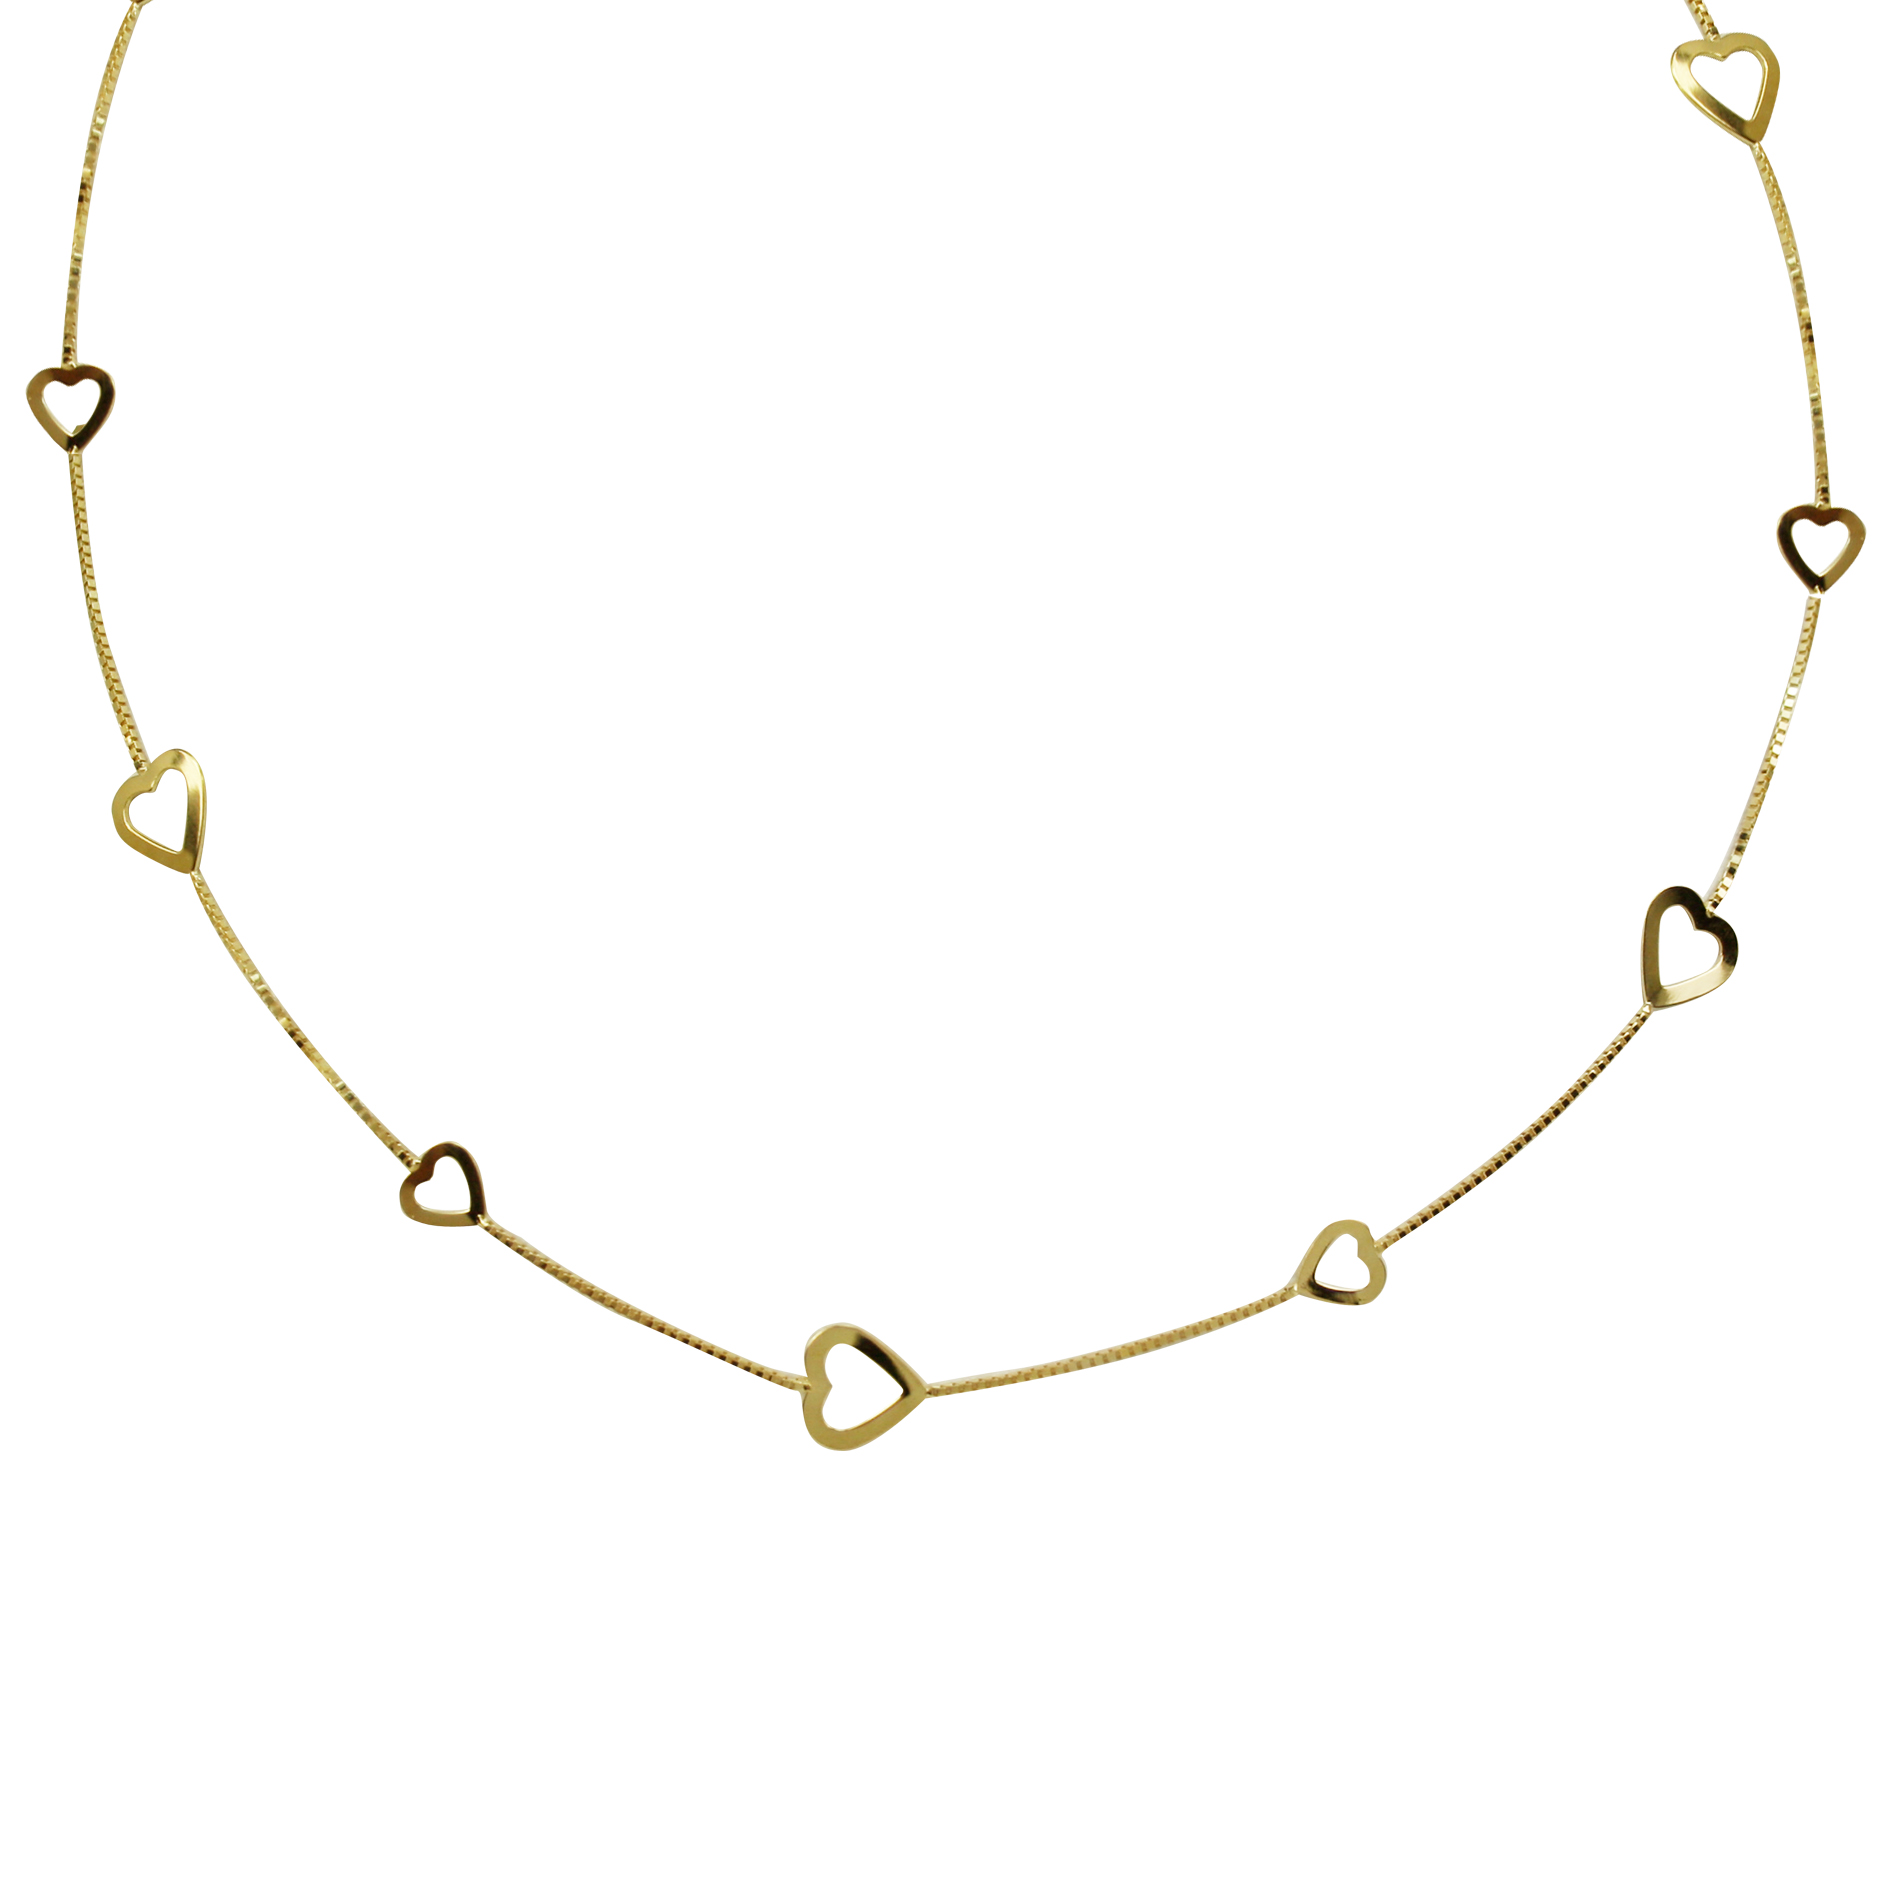 True Gold 10KT NECKLACE       OPEN HEART STATIONS